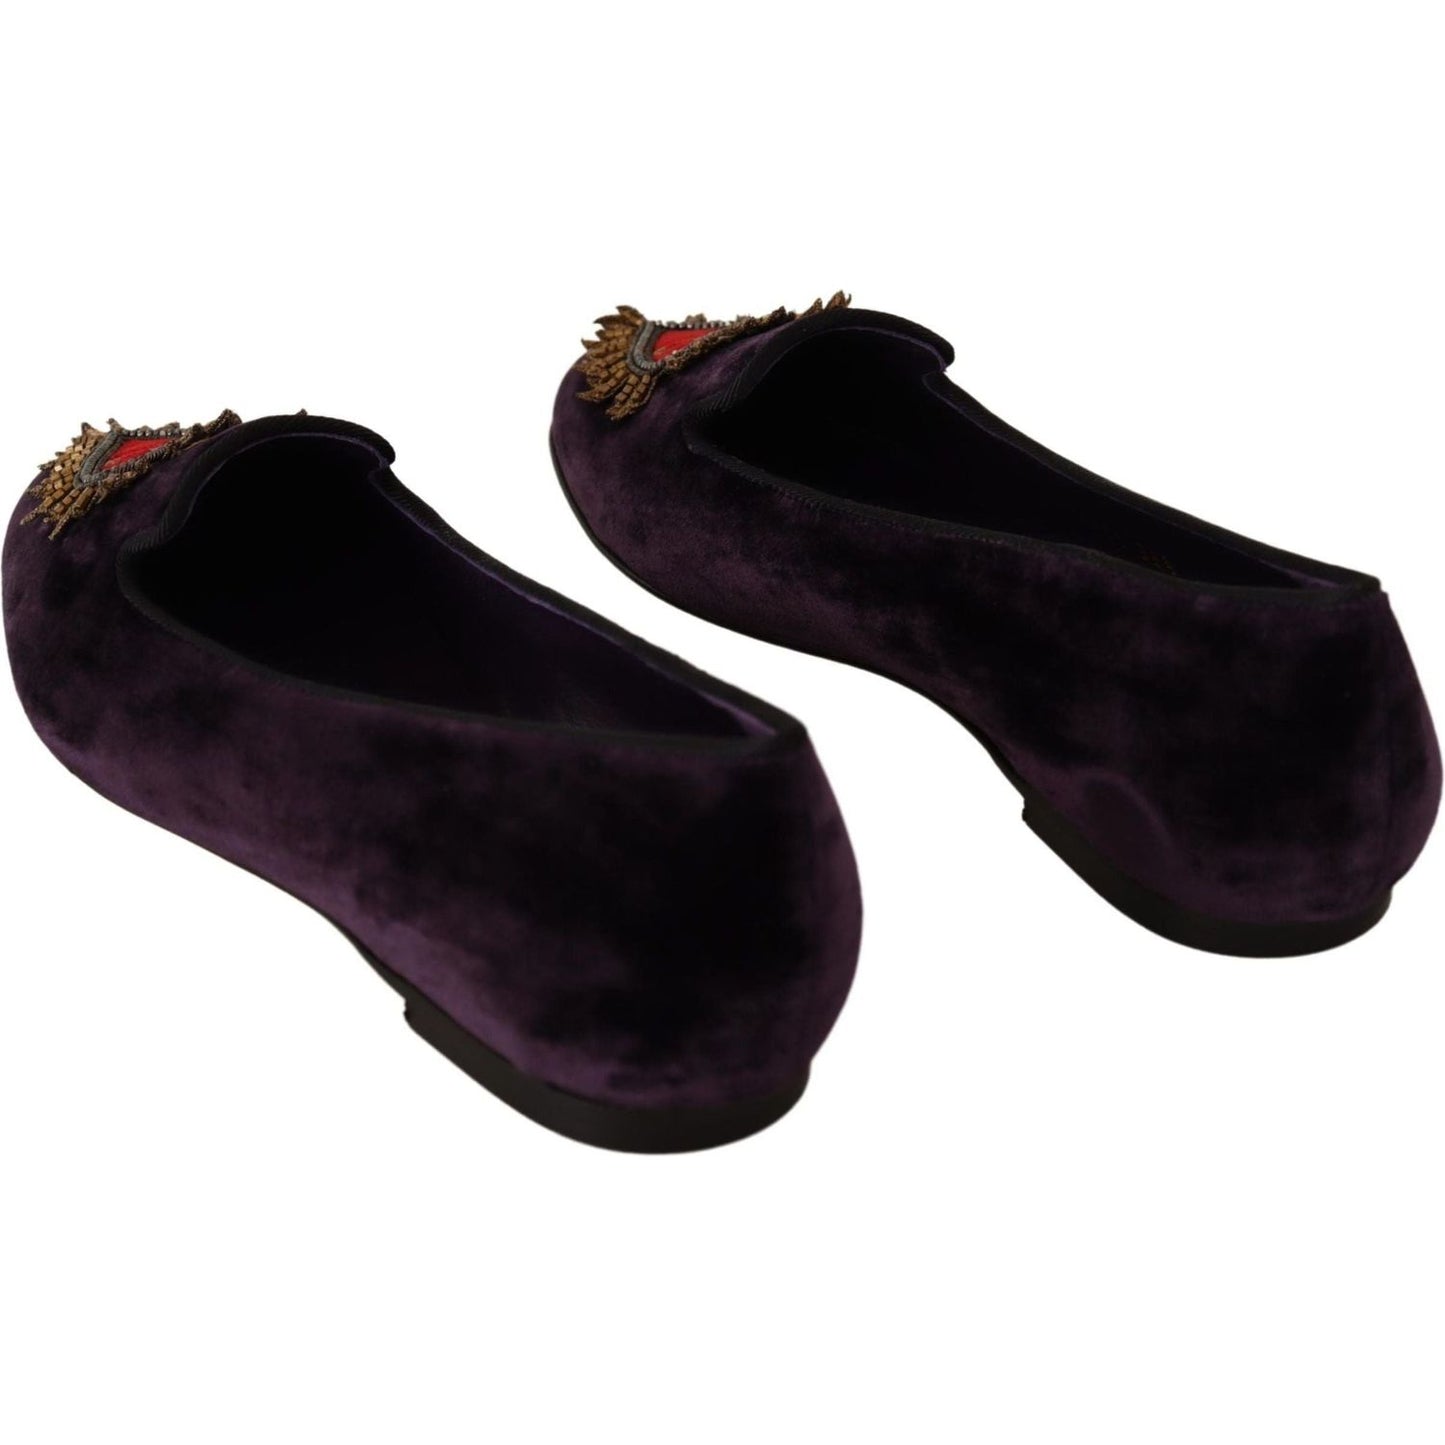 Dolce & Gabbana Chic Purple Velvet Loafers with Heart Detail purple-velvet-dg-heart-loafers-flats-shoes